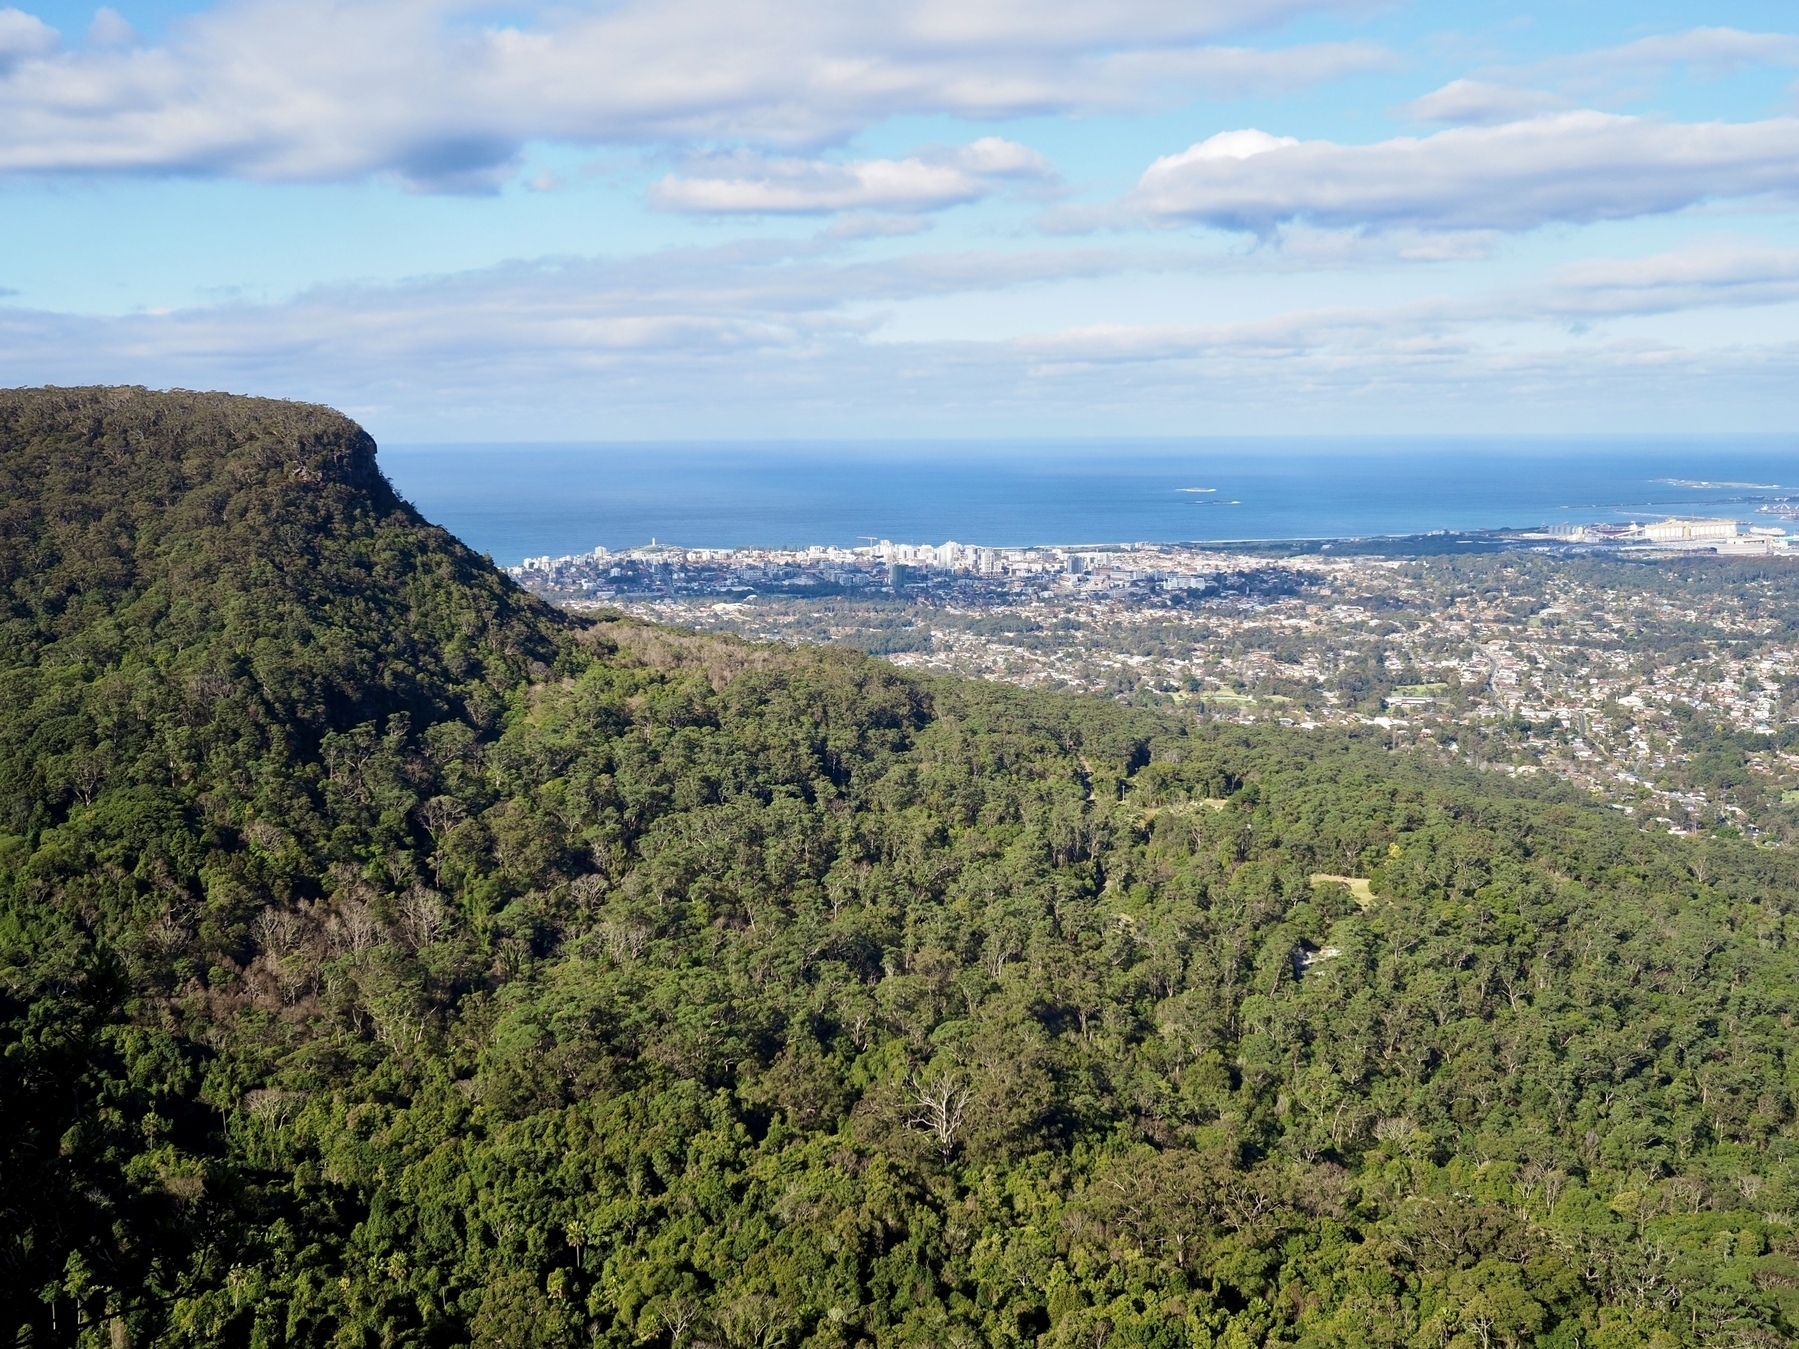 Geera (or Mount Keira) and its foothills to the left, with Wollongong and the Tasman Sea to the right and in the distance